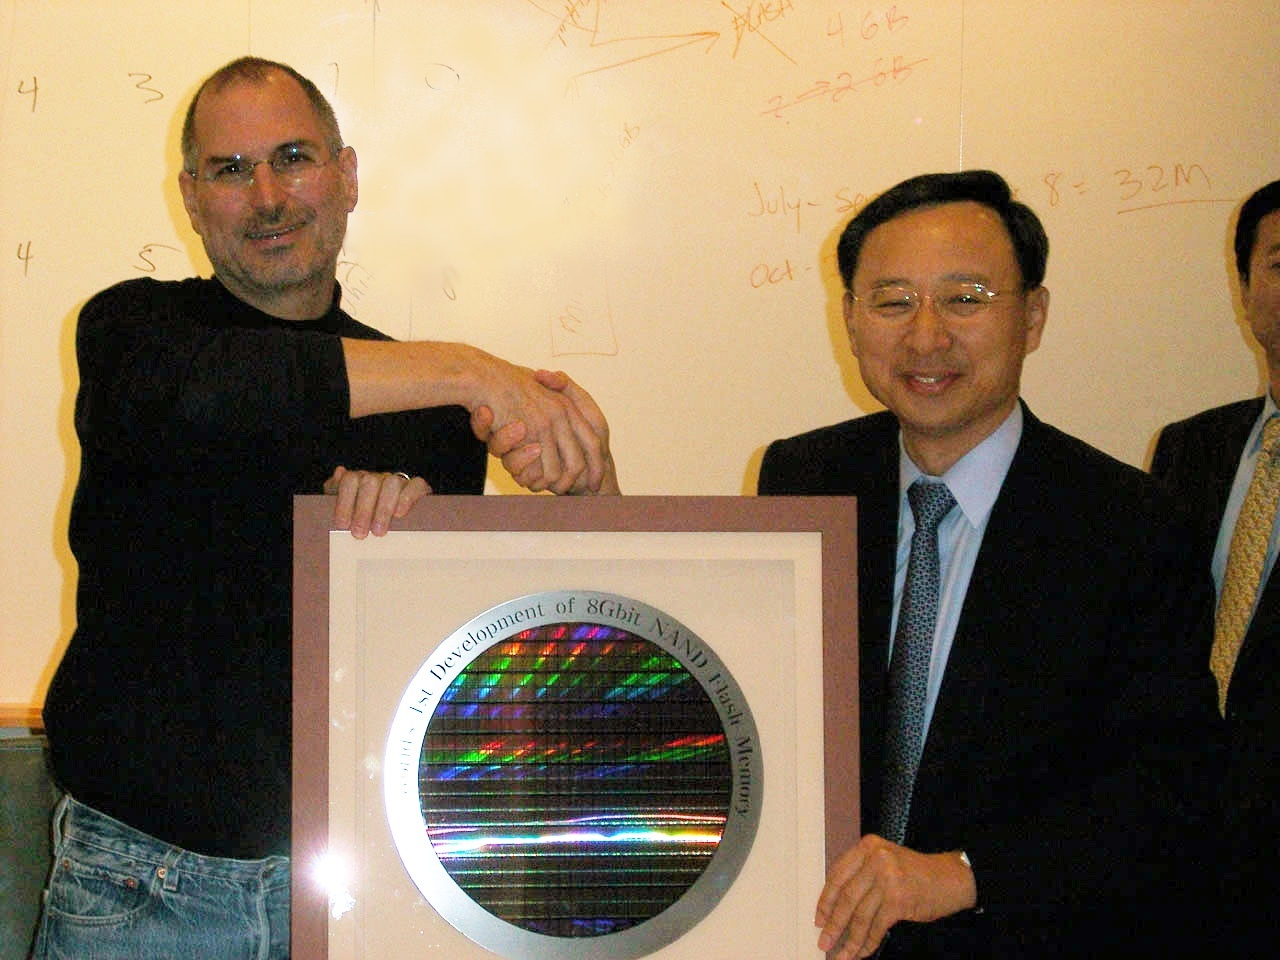 This photo shows Hwang Chang-gyu, author of “Encounters with Great Minds,” giving Apple co-founder Steve Jobs the 60-nanometer 8-gigabit NAND flash wafer after their meeting in December 2004 in Cupertino, California. (Sigongsa)